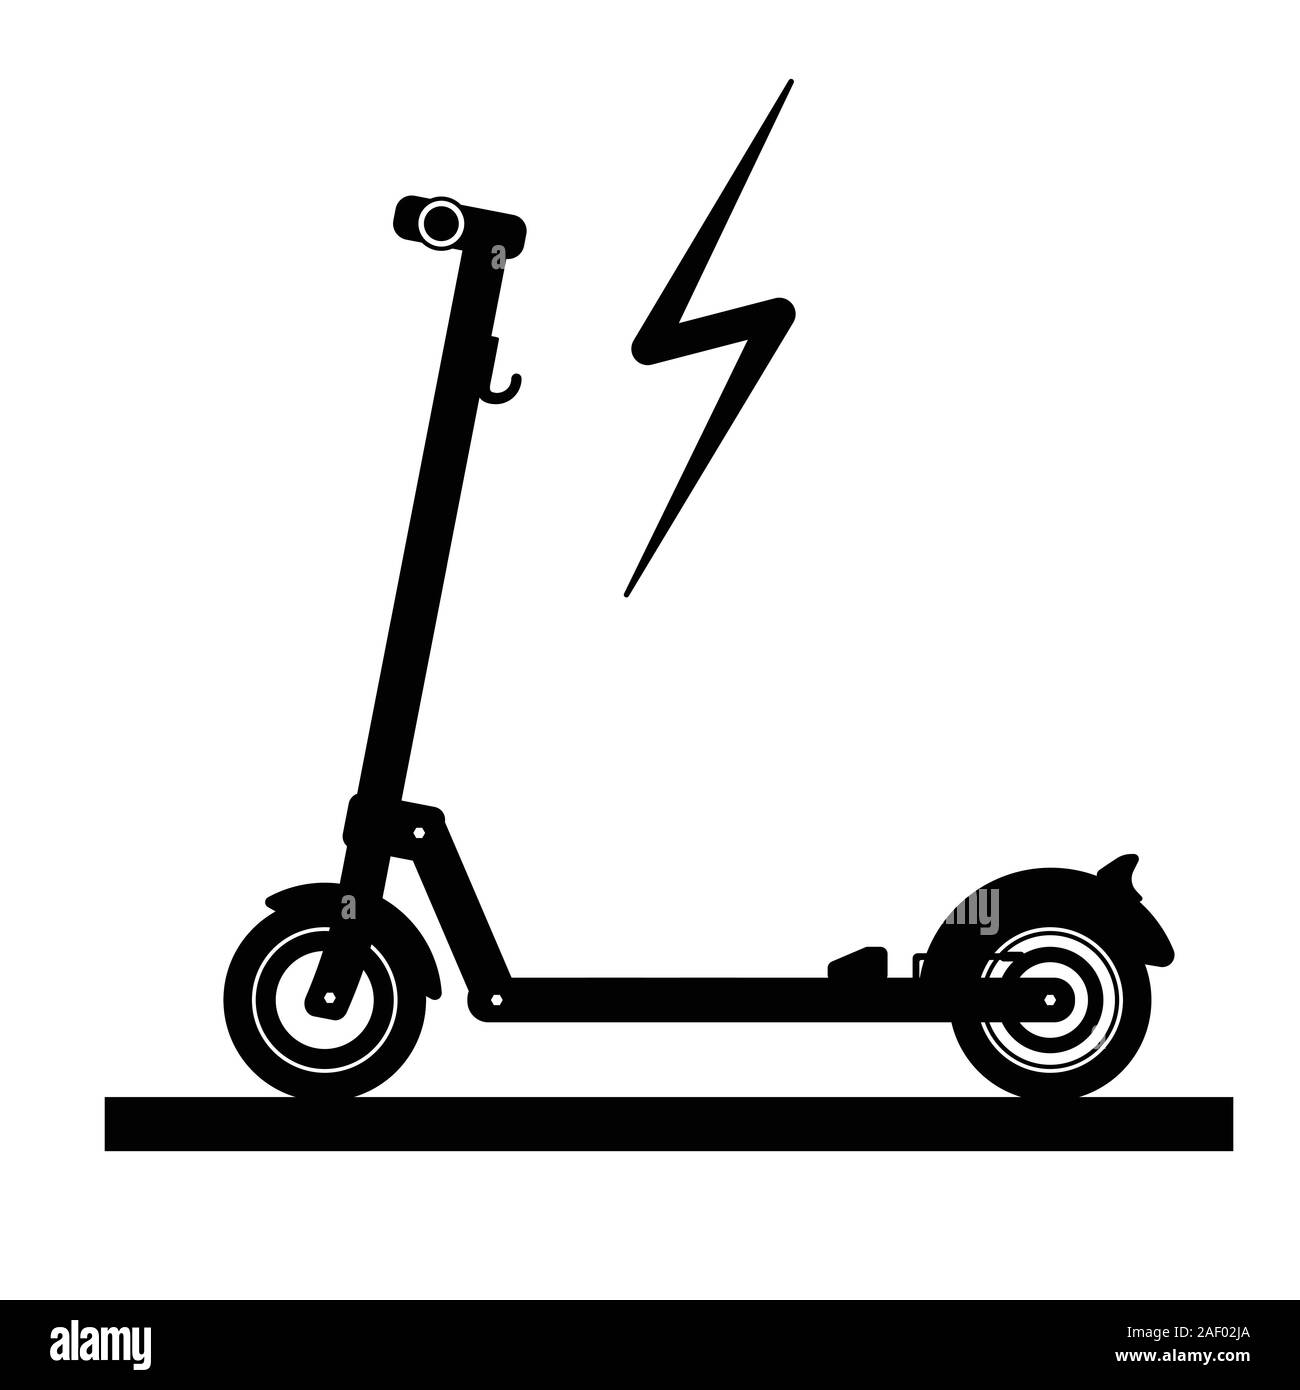 Modern electric scooter on a white background drawn in a silhouette style with a lighting sign. Stock Vector